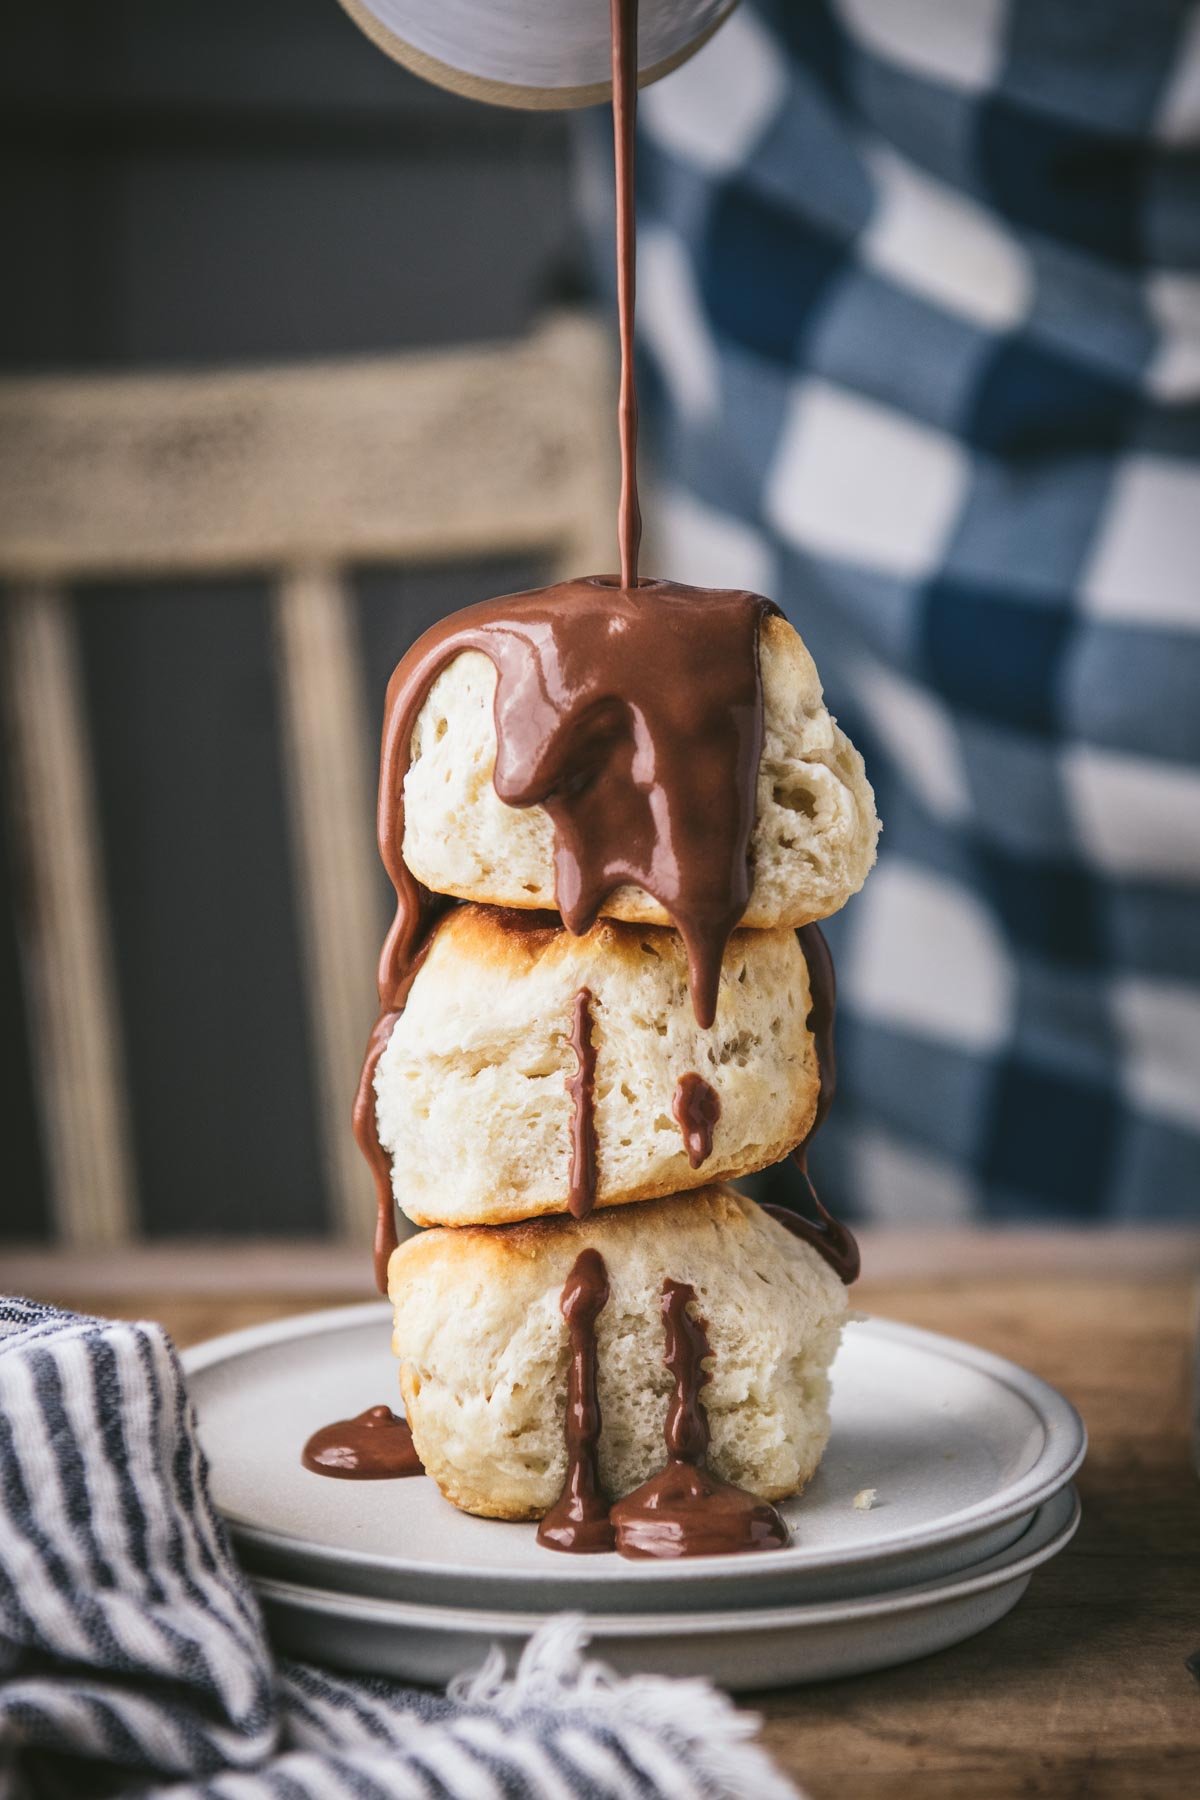 Pouring southern chocolate gravy over three buttermilk biscuits